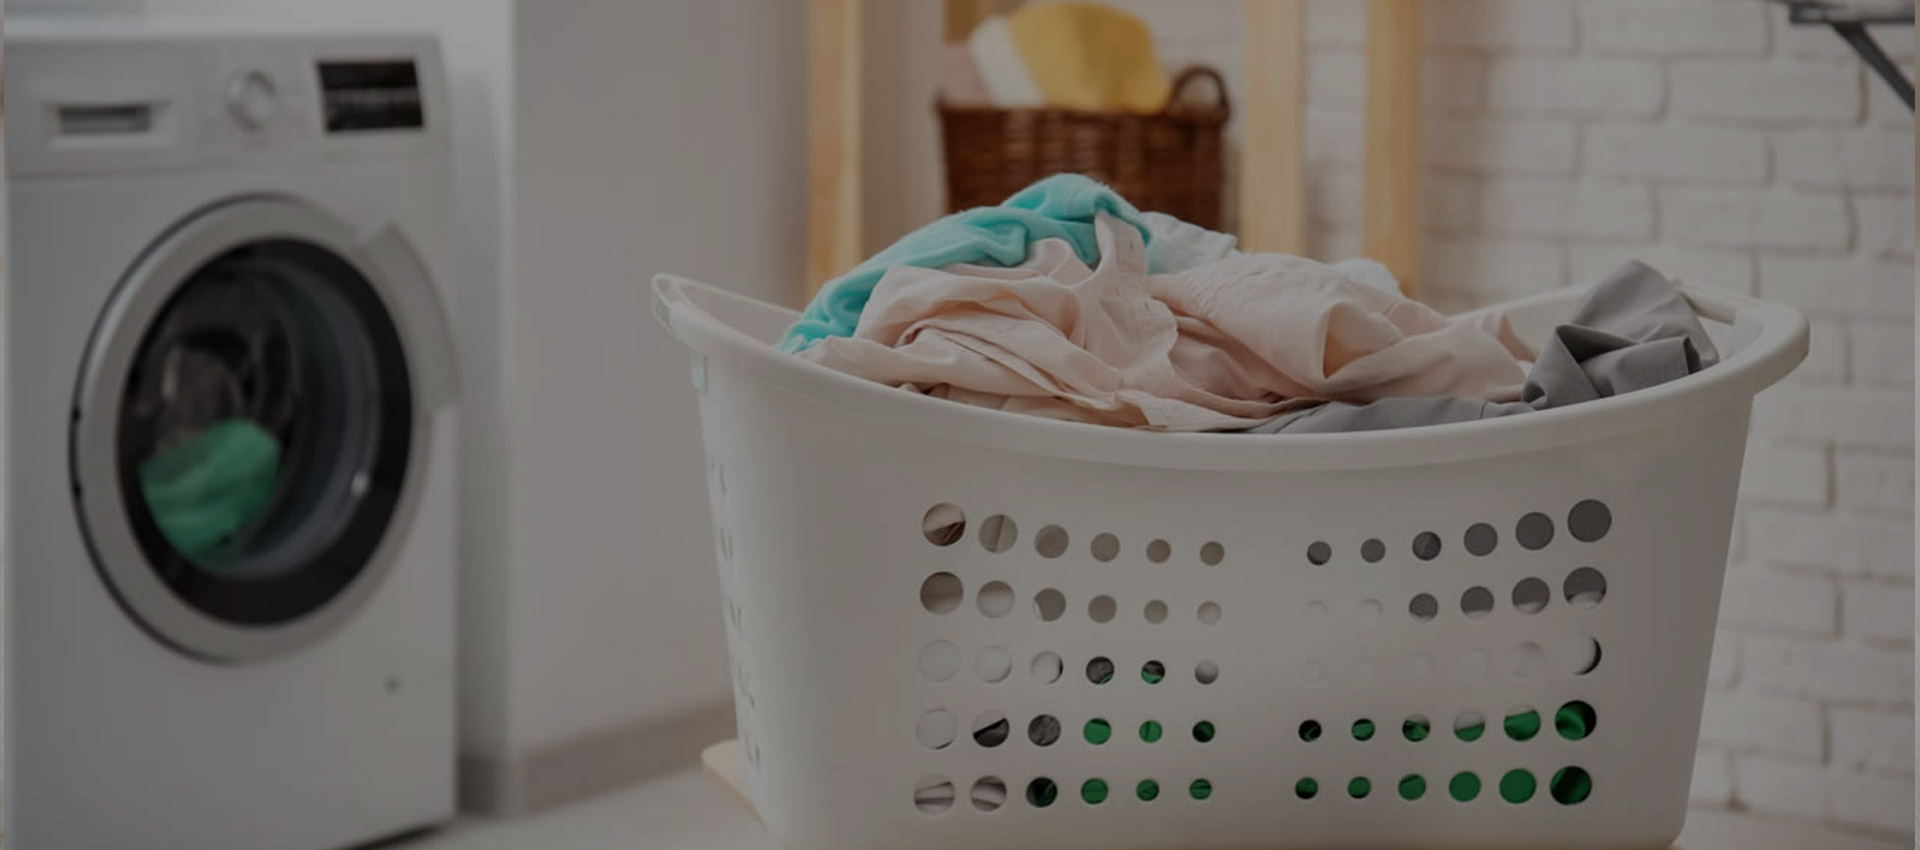 Clothes inside the Laundry Basket